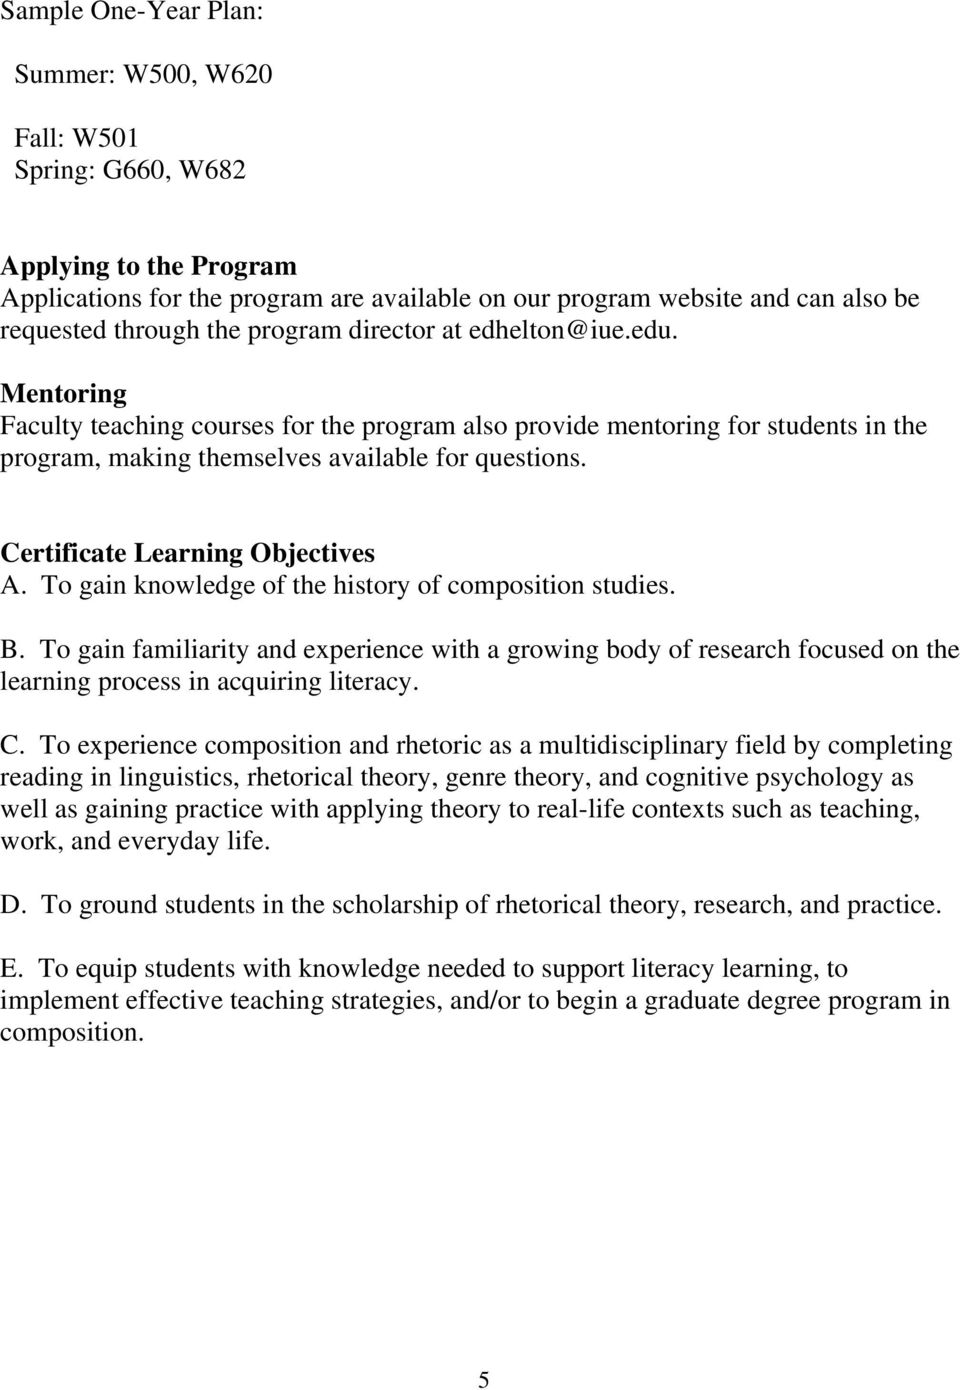 Certificate Learning Objectives A. To gain knowledge of the history of composition studies. B.